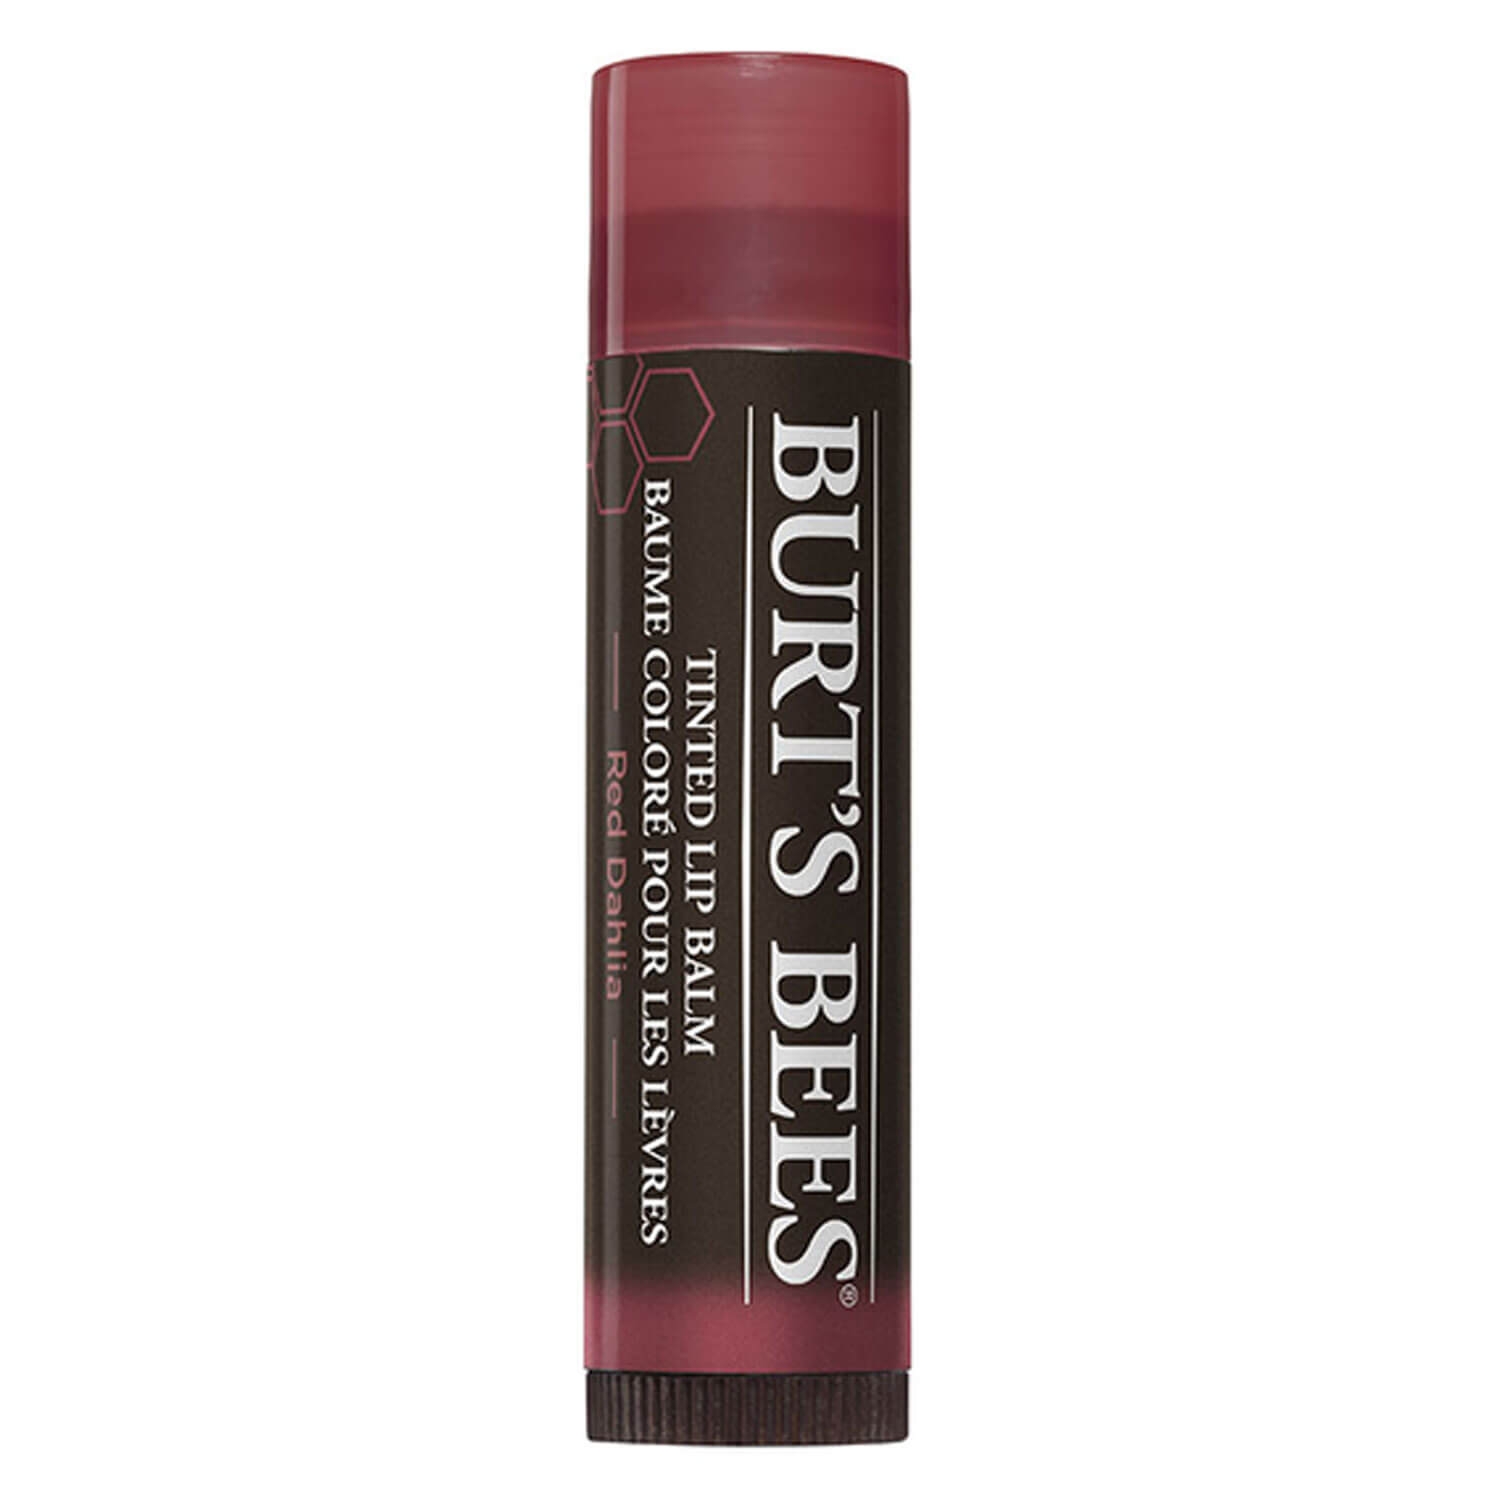 Product image from Burt's Bees - Tinted Lip Balm Red Dahlia